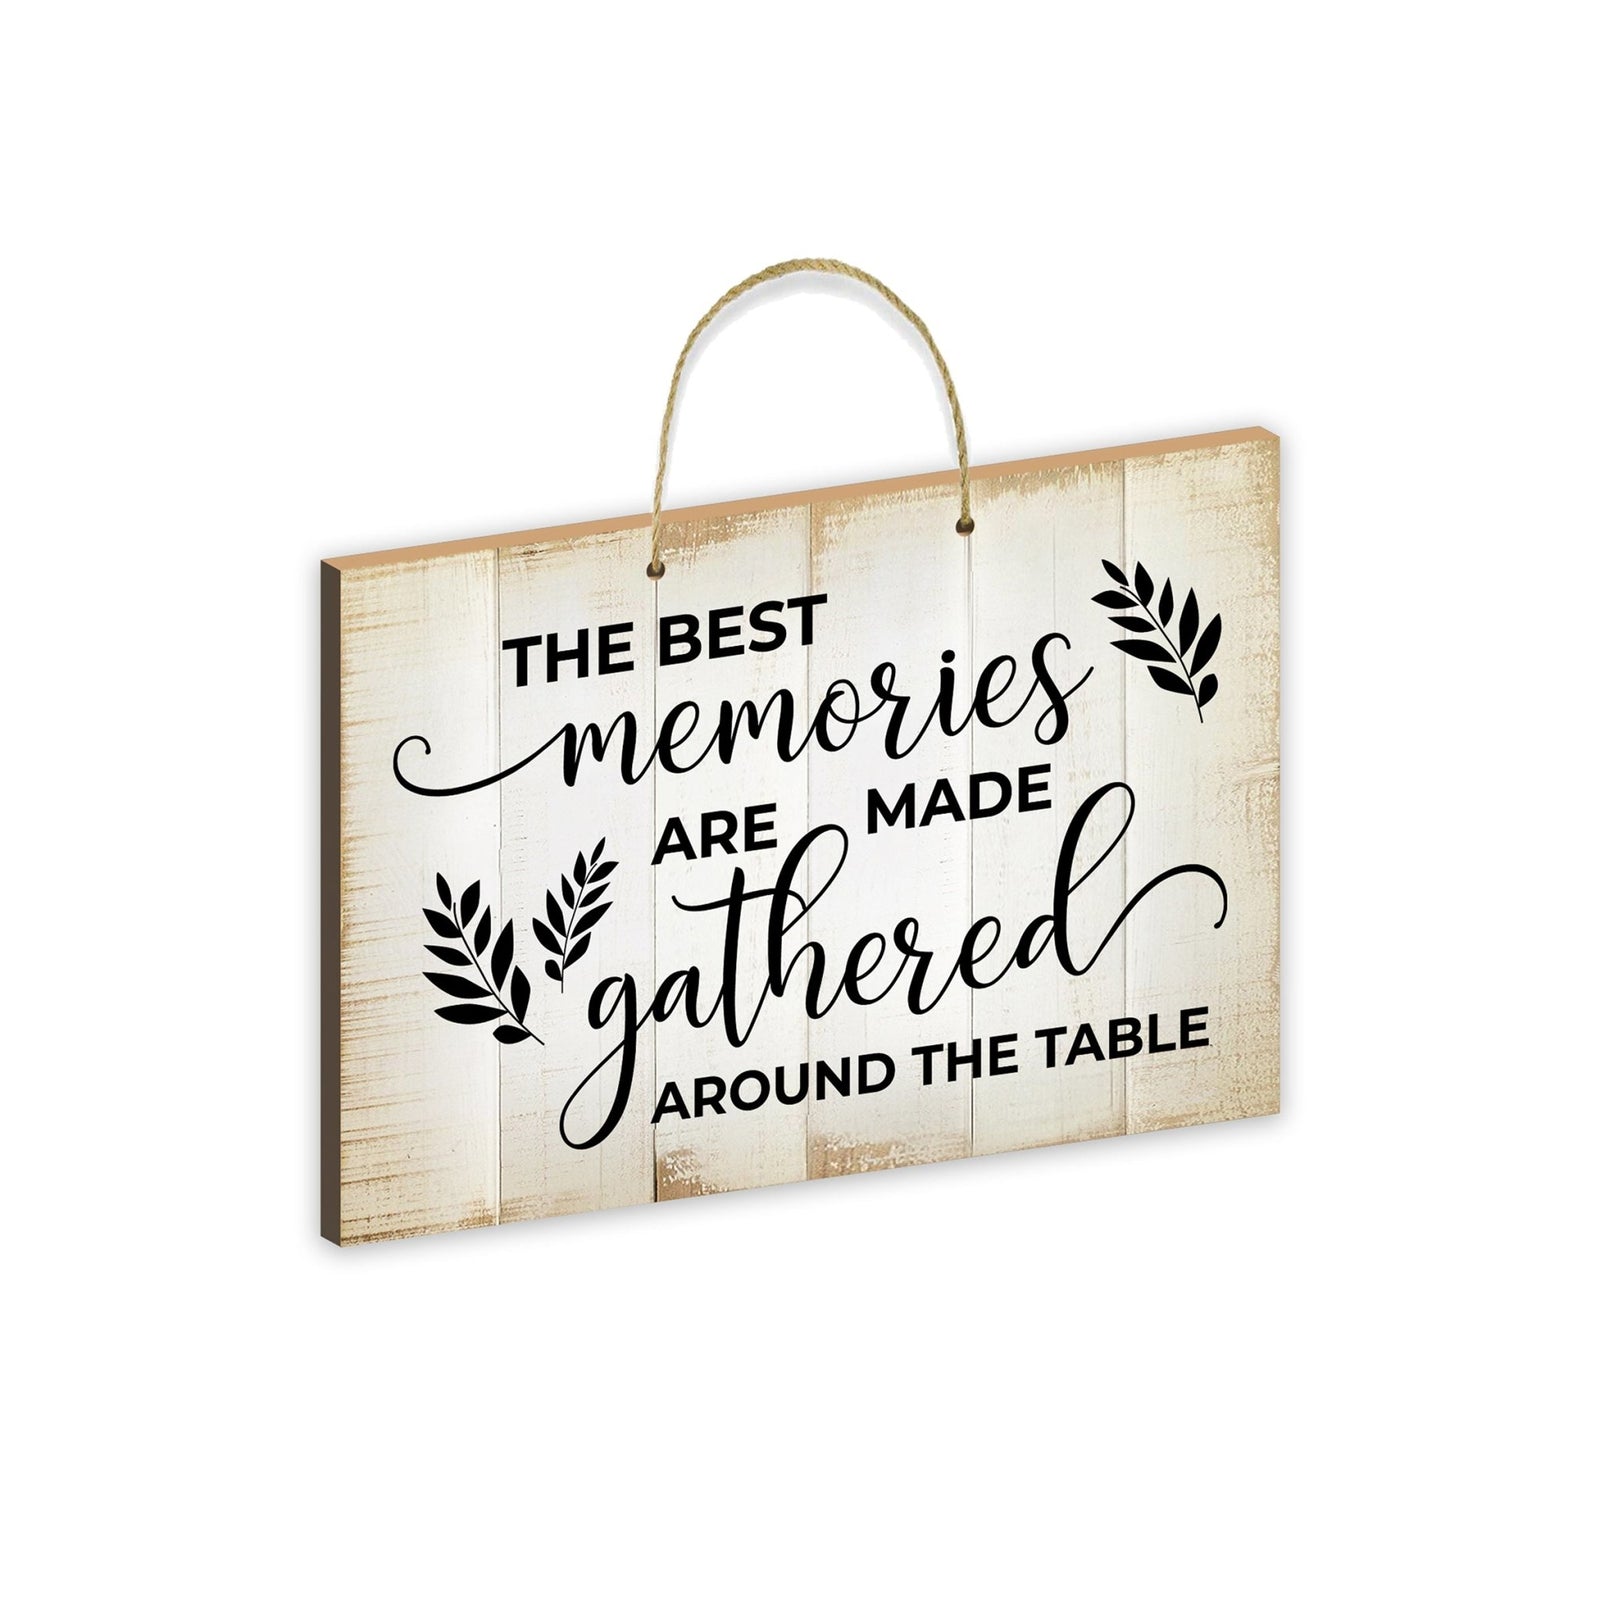 Inspirational Rustic Wooden Wall Hanging Rope Sign Kitchen Décor - The Best Memories